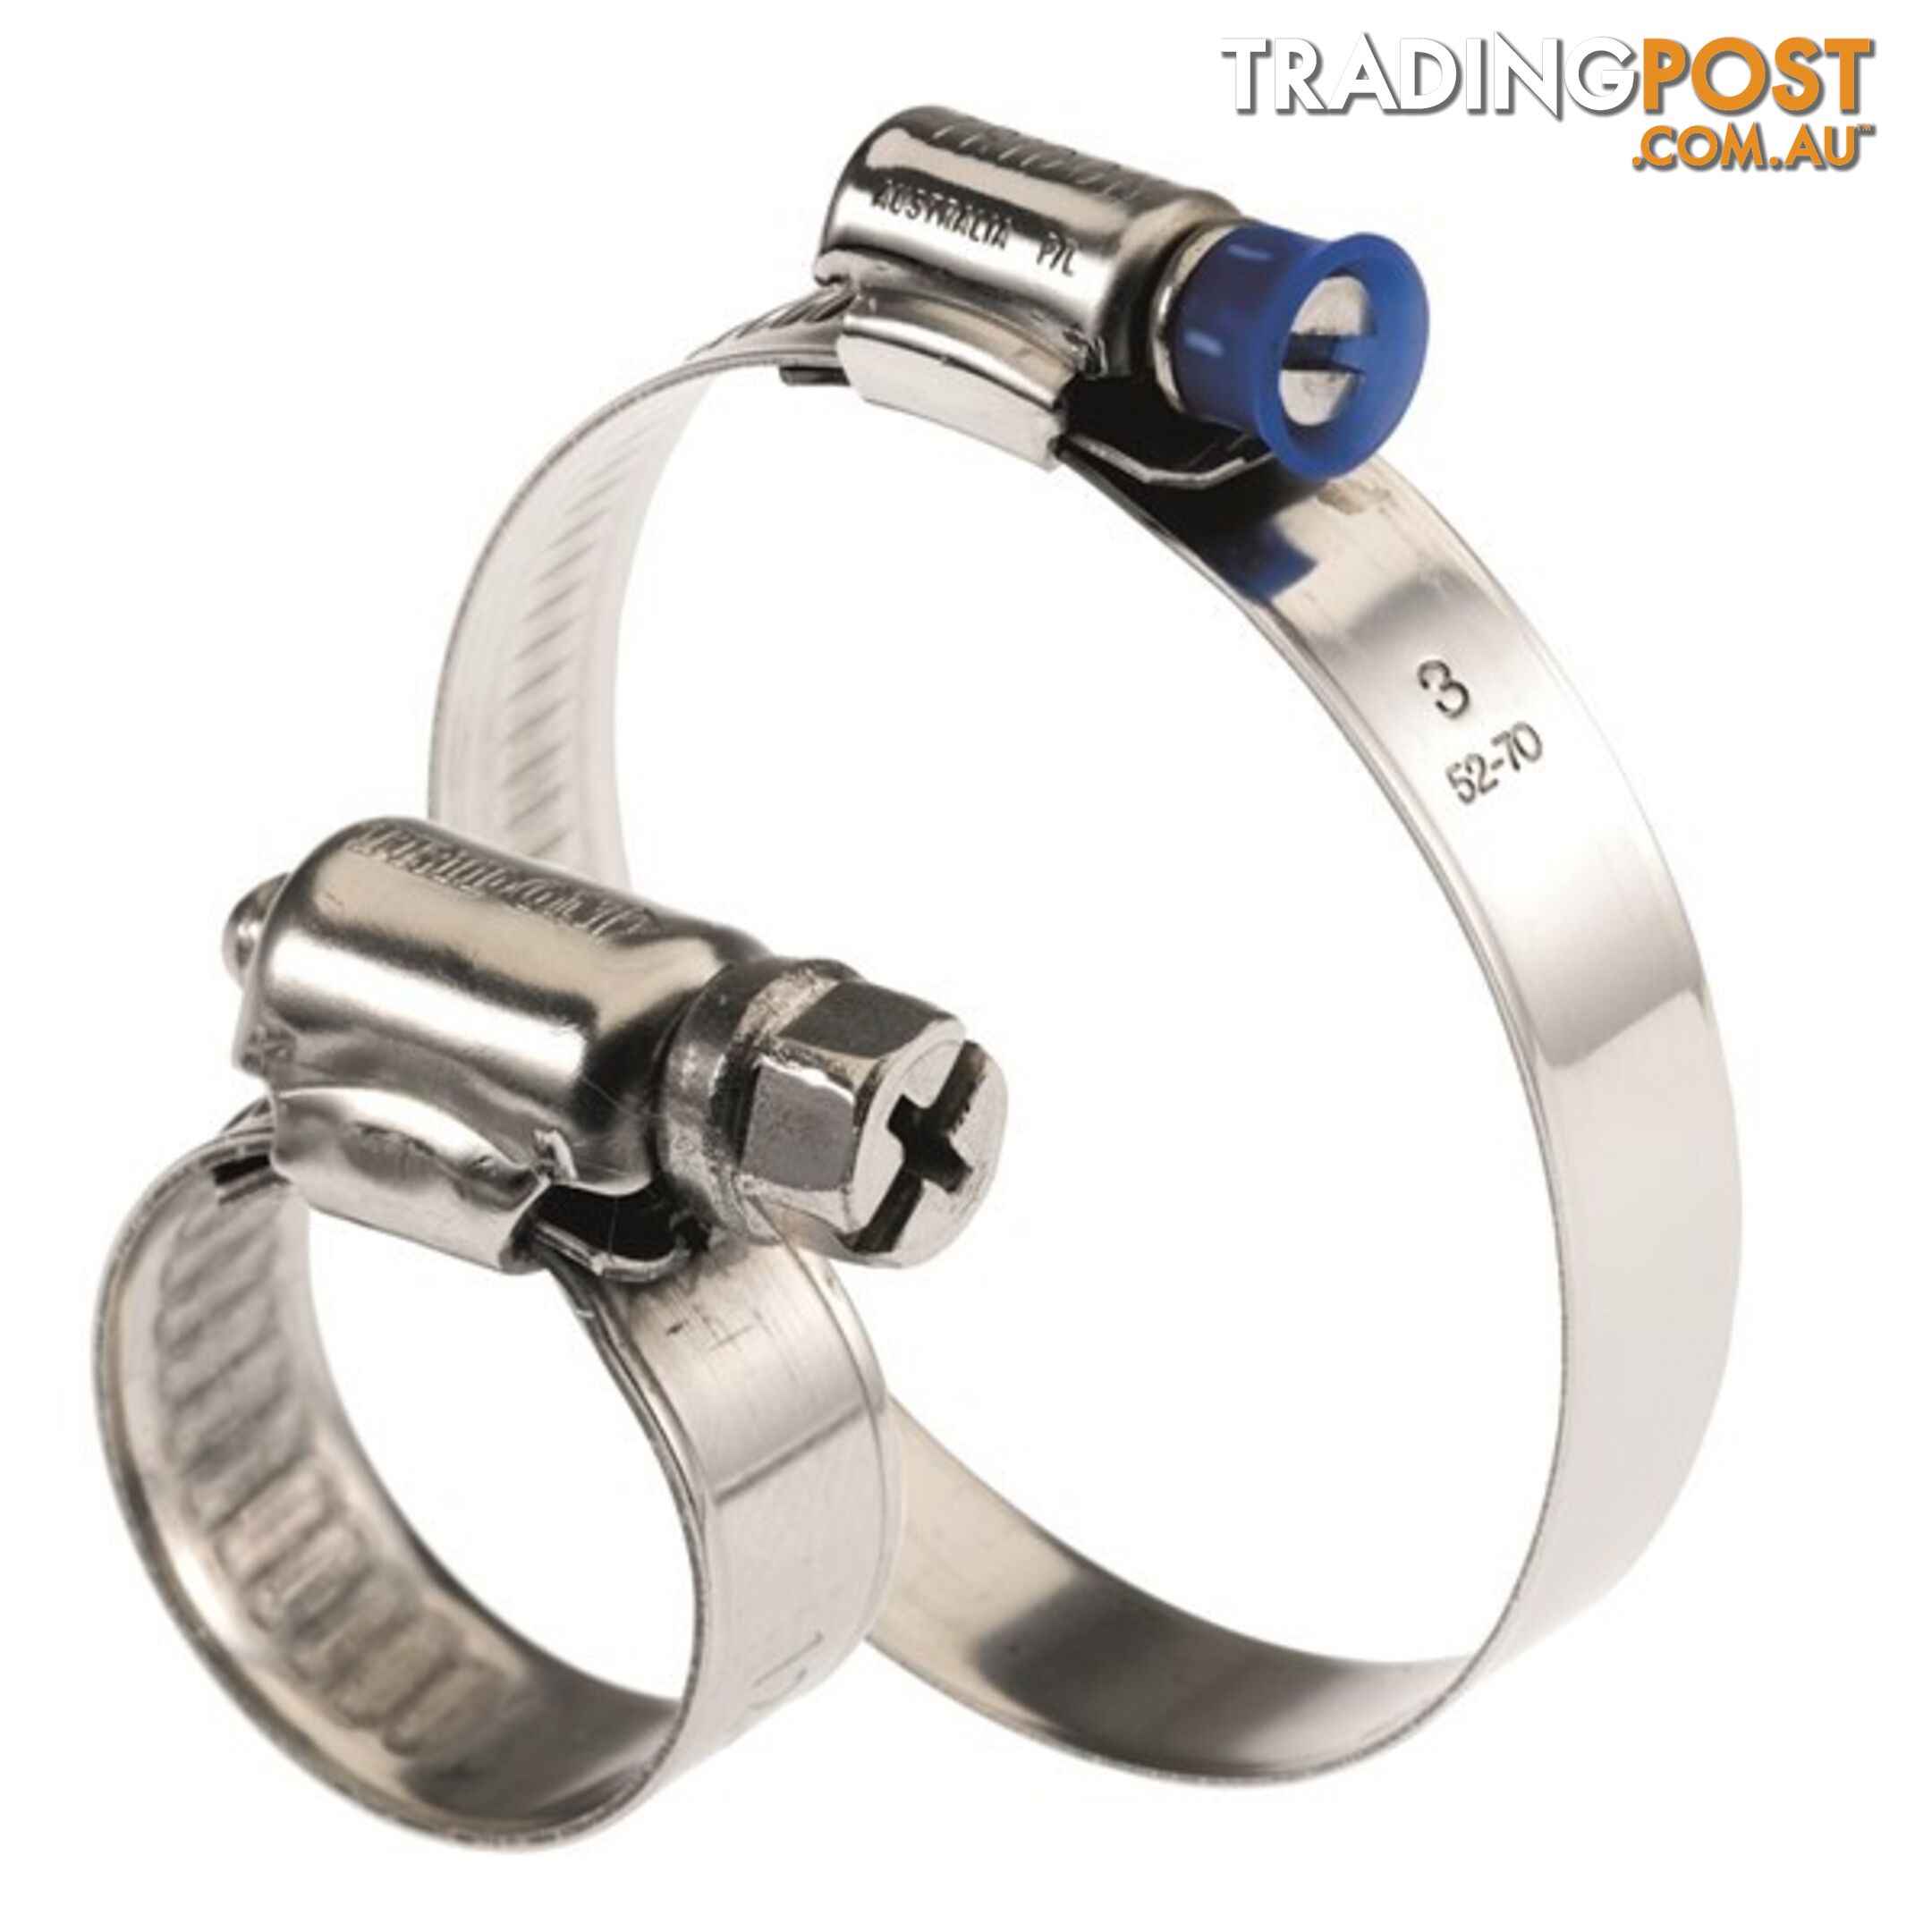 Tridon Hose Clamp 35 -53mm Regular Solid Band Collared Full S. Steel 10pk SKU - SMPC2P